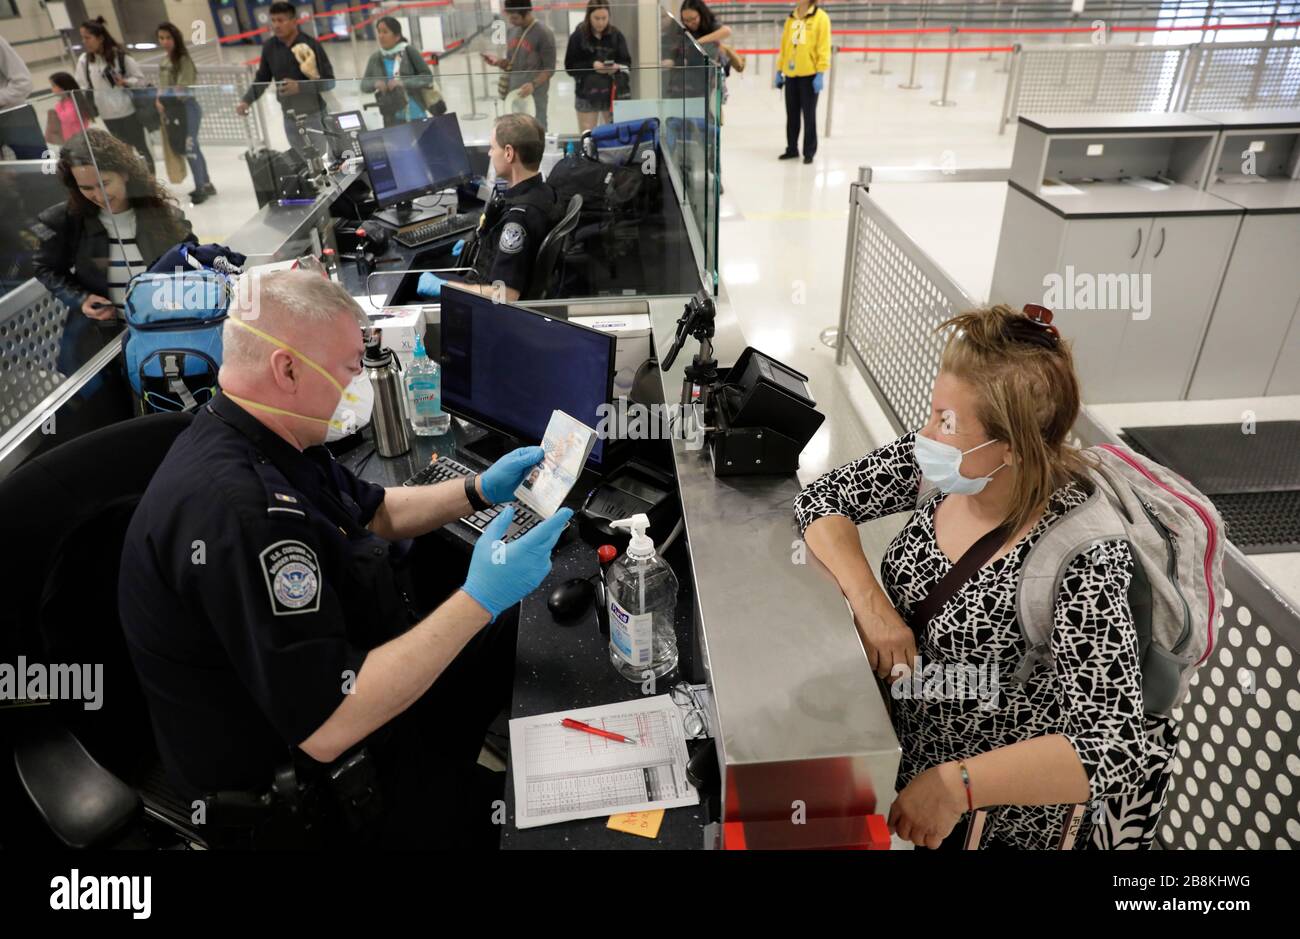 U.S. Customs and Border Protection officers screen international passengers arriving at Dulles International Airport wearing personal protective equipment March 13, 2020 in Dulles, Virginia. In response to the COVID-19, coronavirus pandemic CBP officers and travelers have begun wearing gloves and masks as protection from viral exposure. Stock Photo